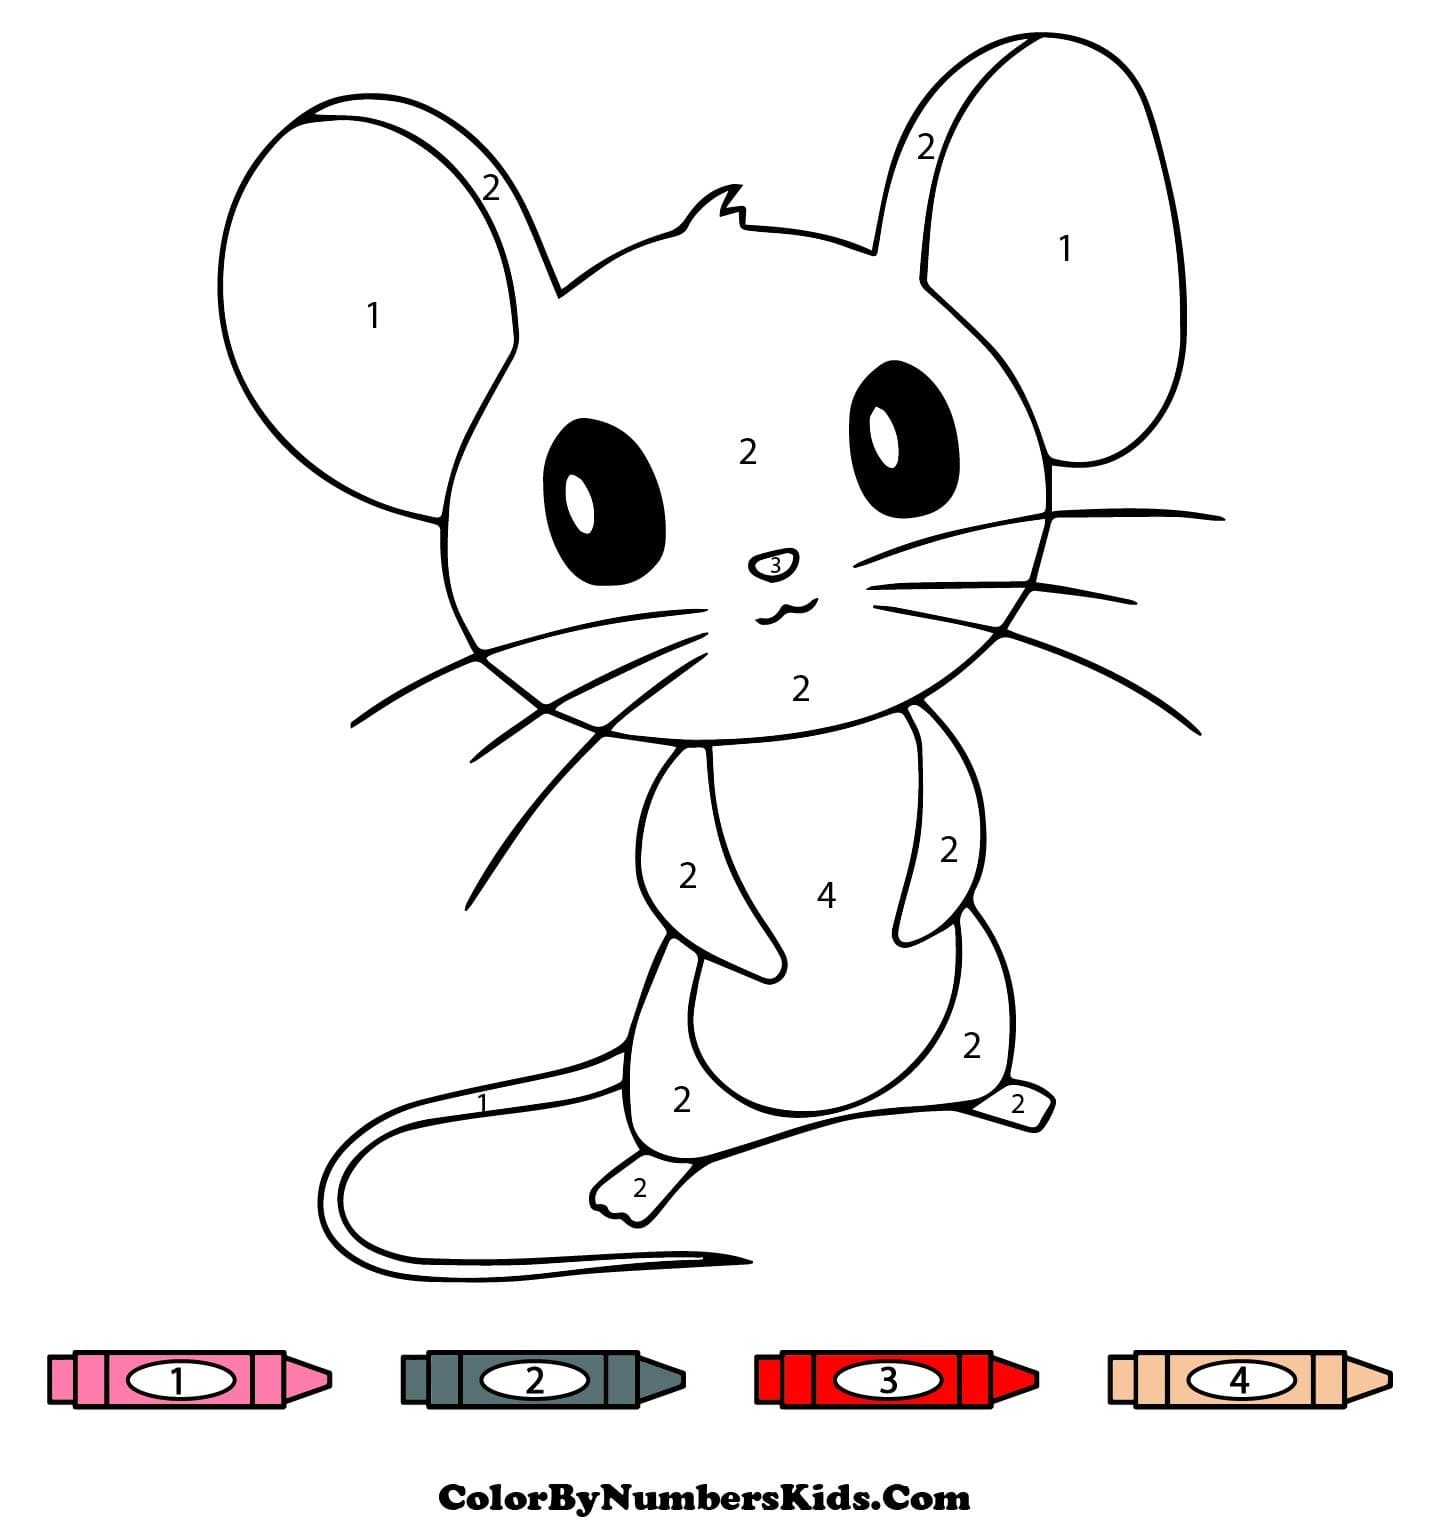 A Cute Mouse Color By Number